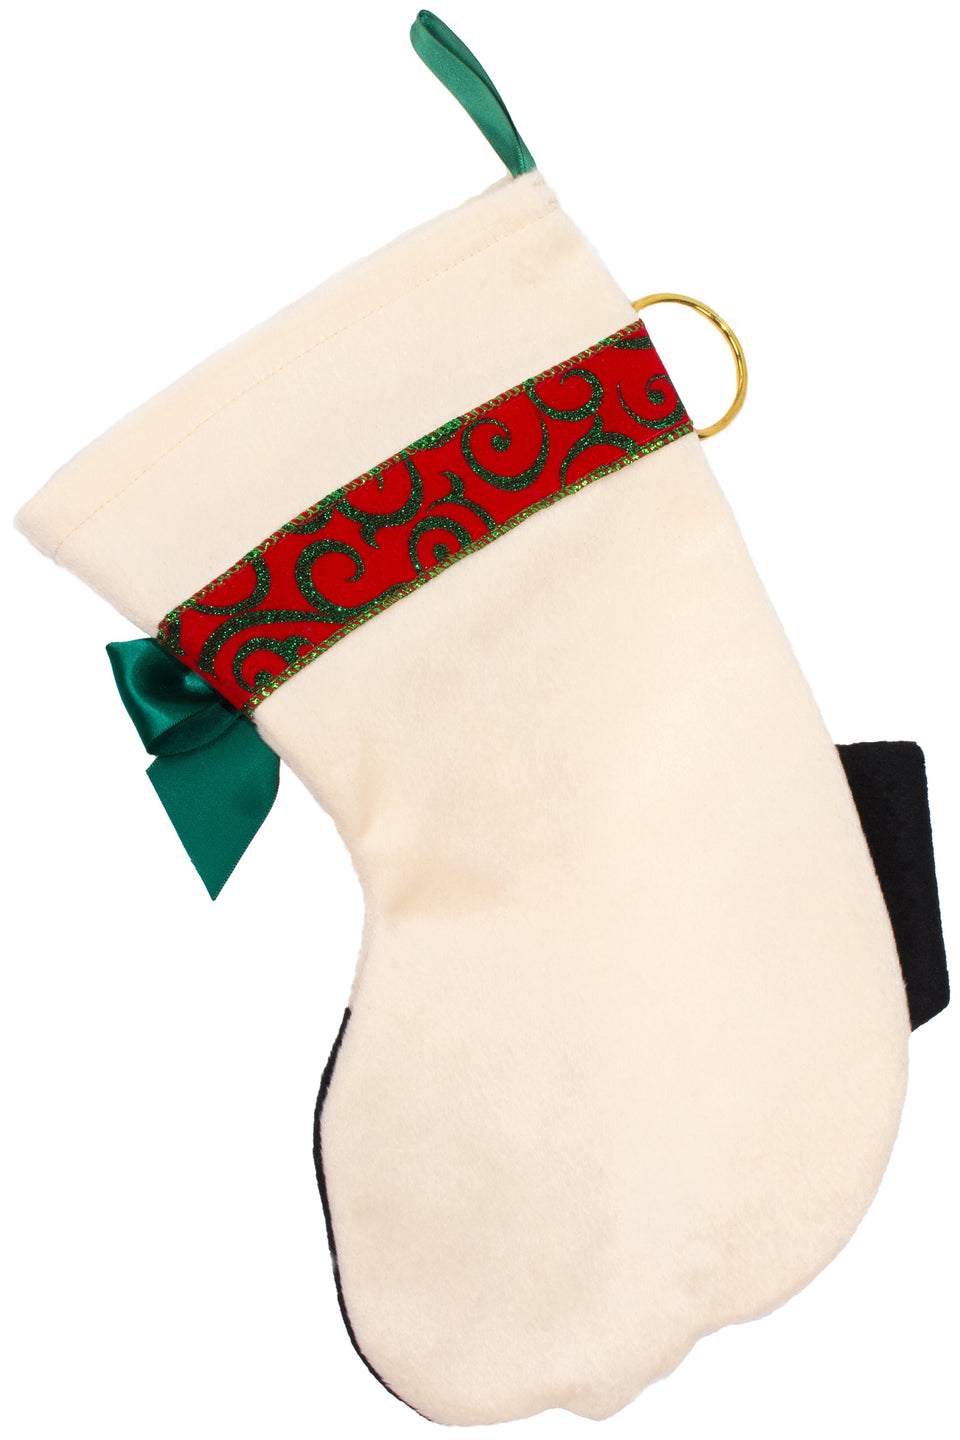 This Pug Christmas dog stocking is the perfect gift for stuffing toys and treats into to spoil your fur baby for Christmas, or whatever holiday you celebrate!